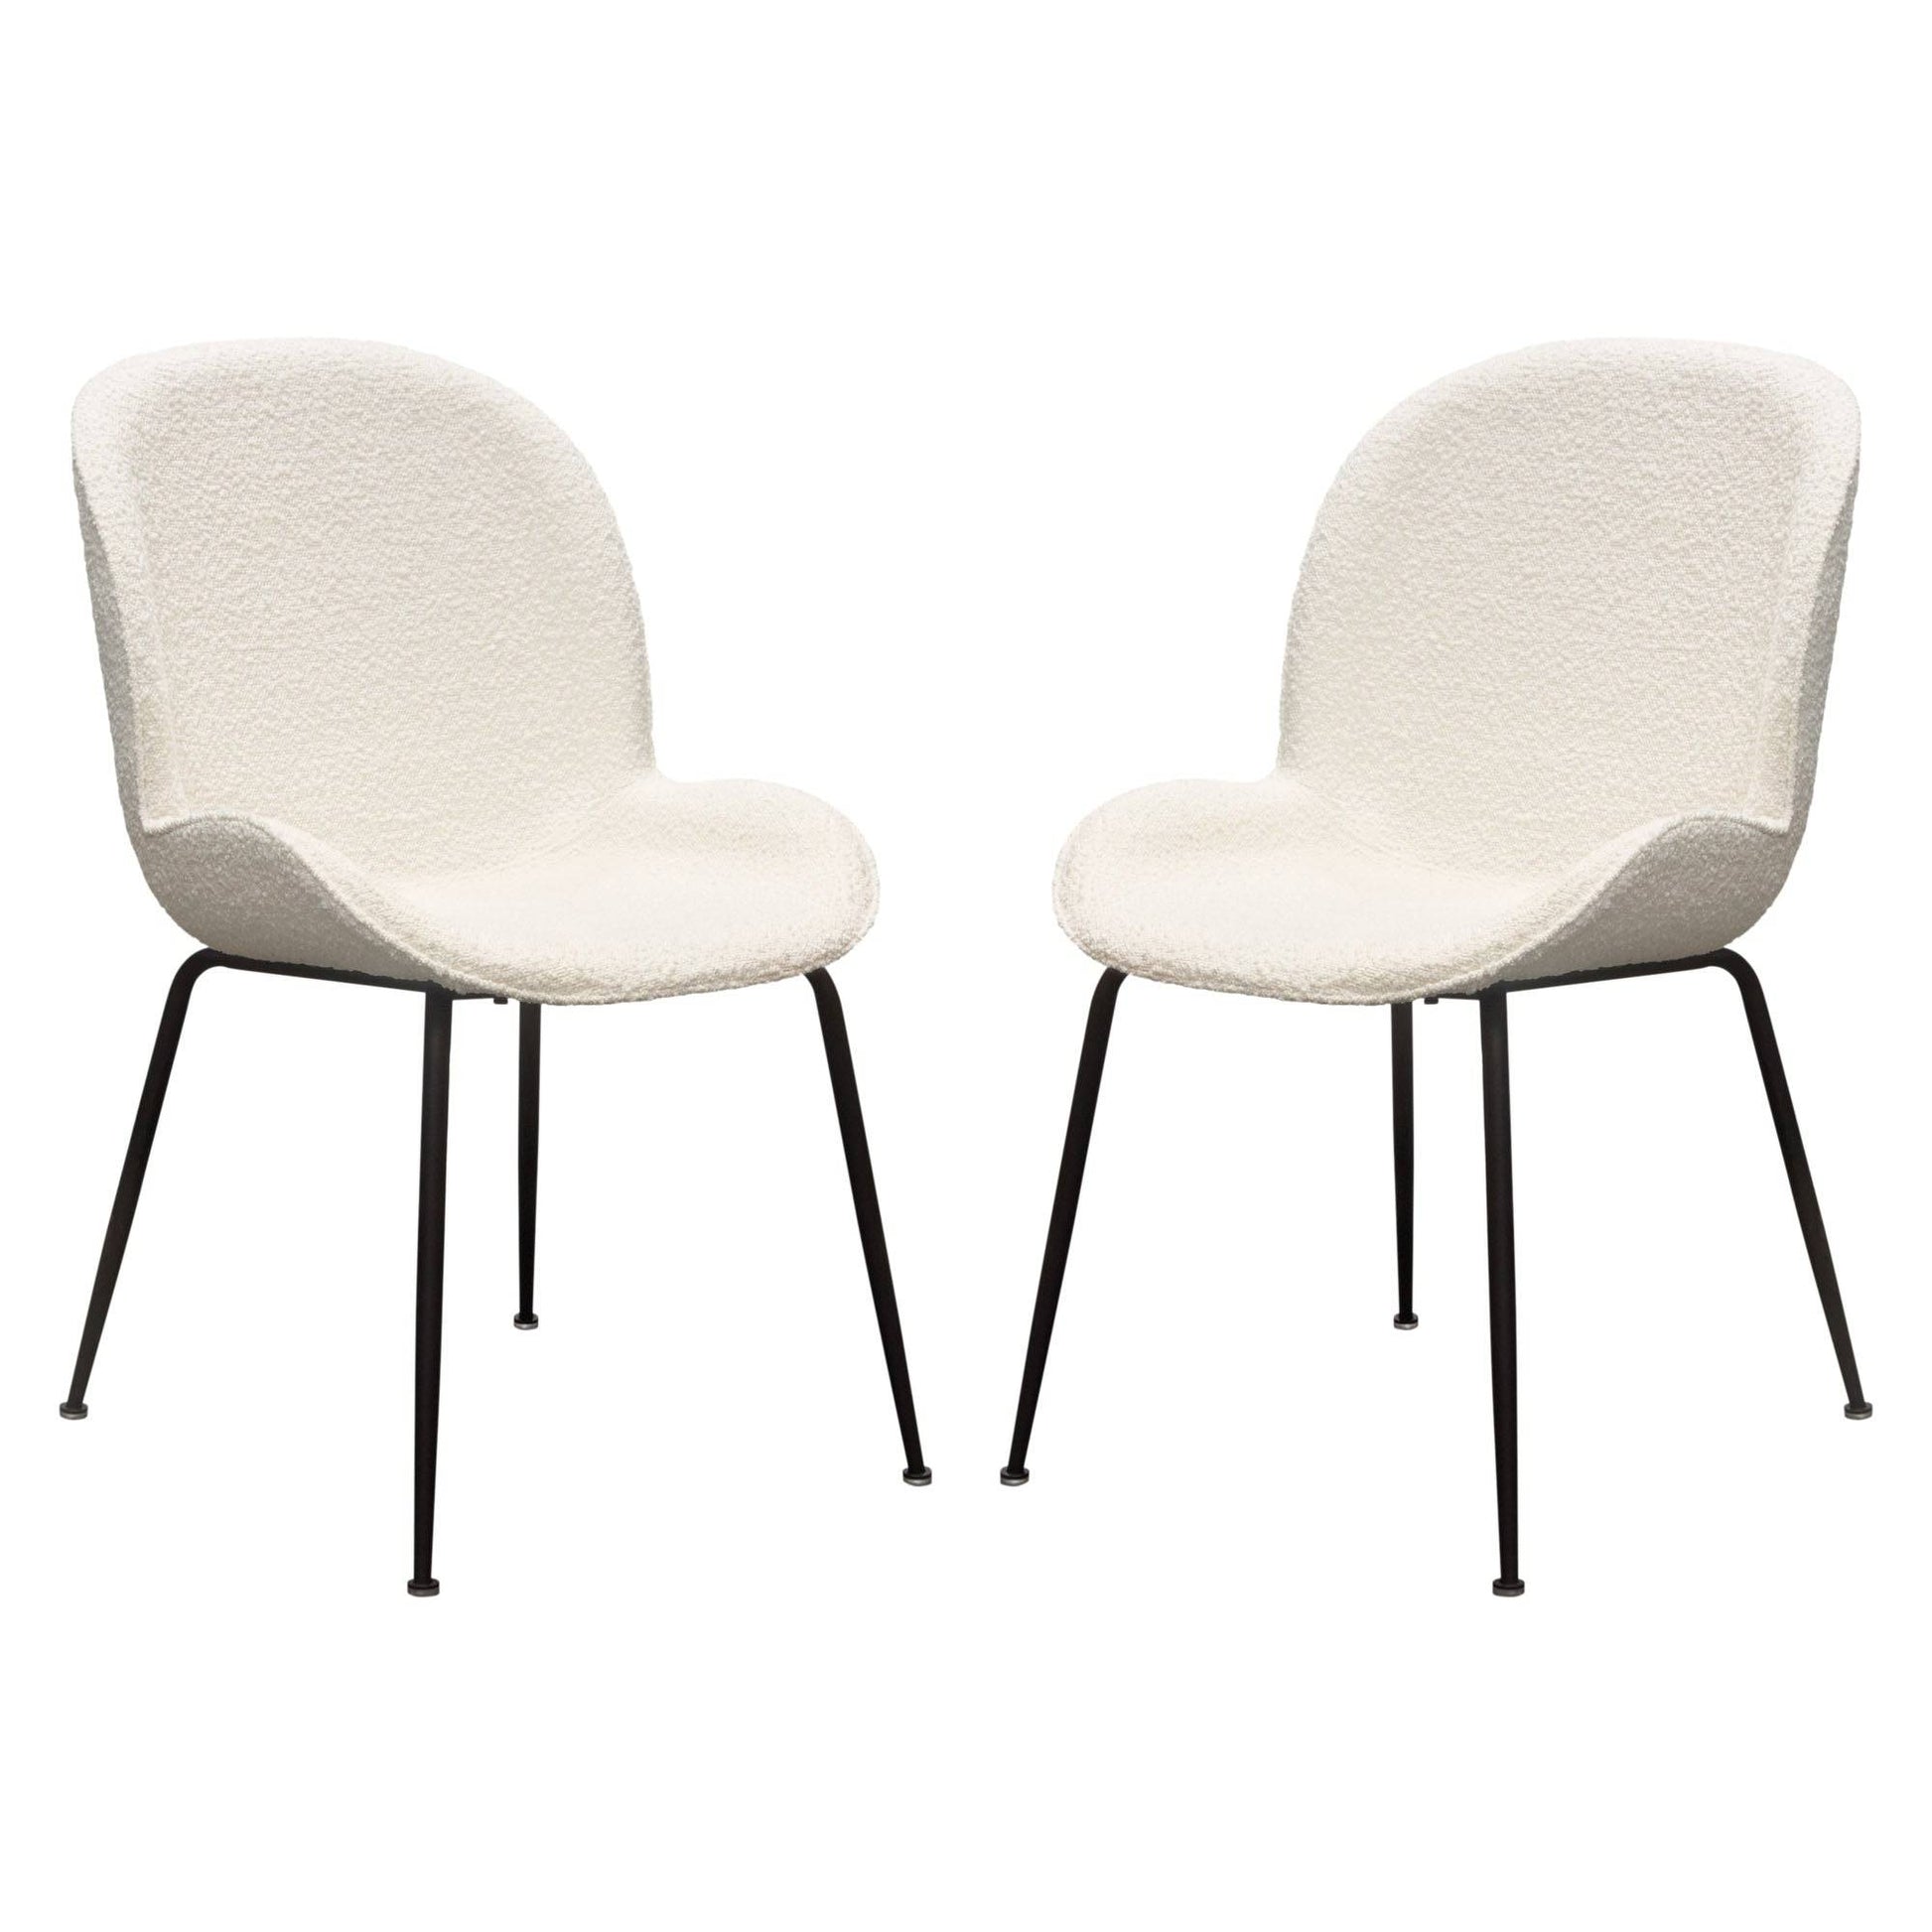 Delfina Dining Chair in Ivory Boucle- Set of 2 - Elite Maison